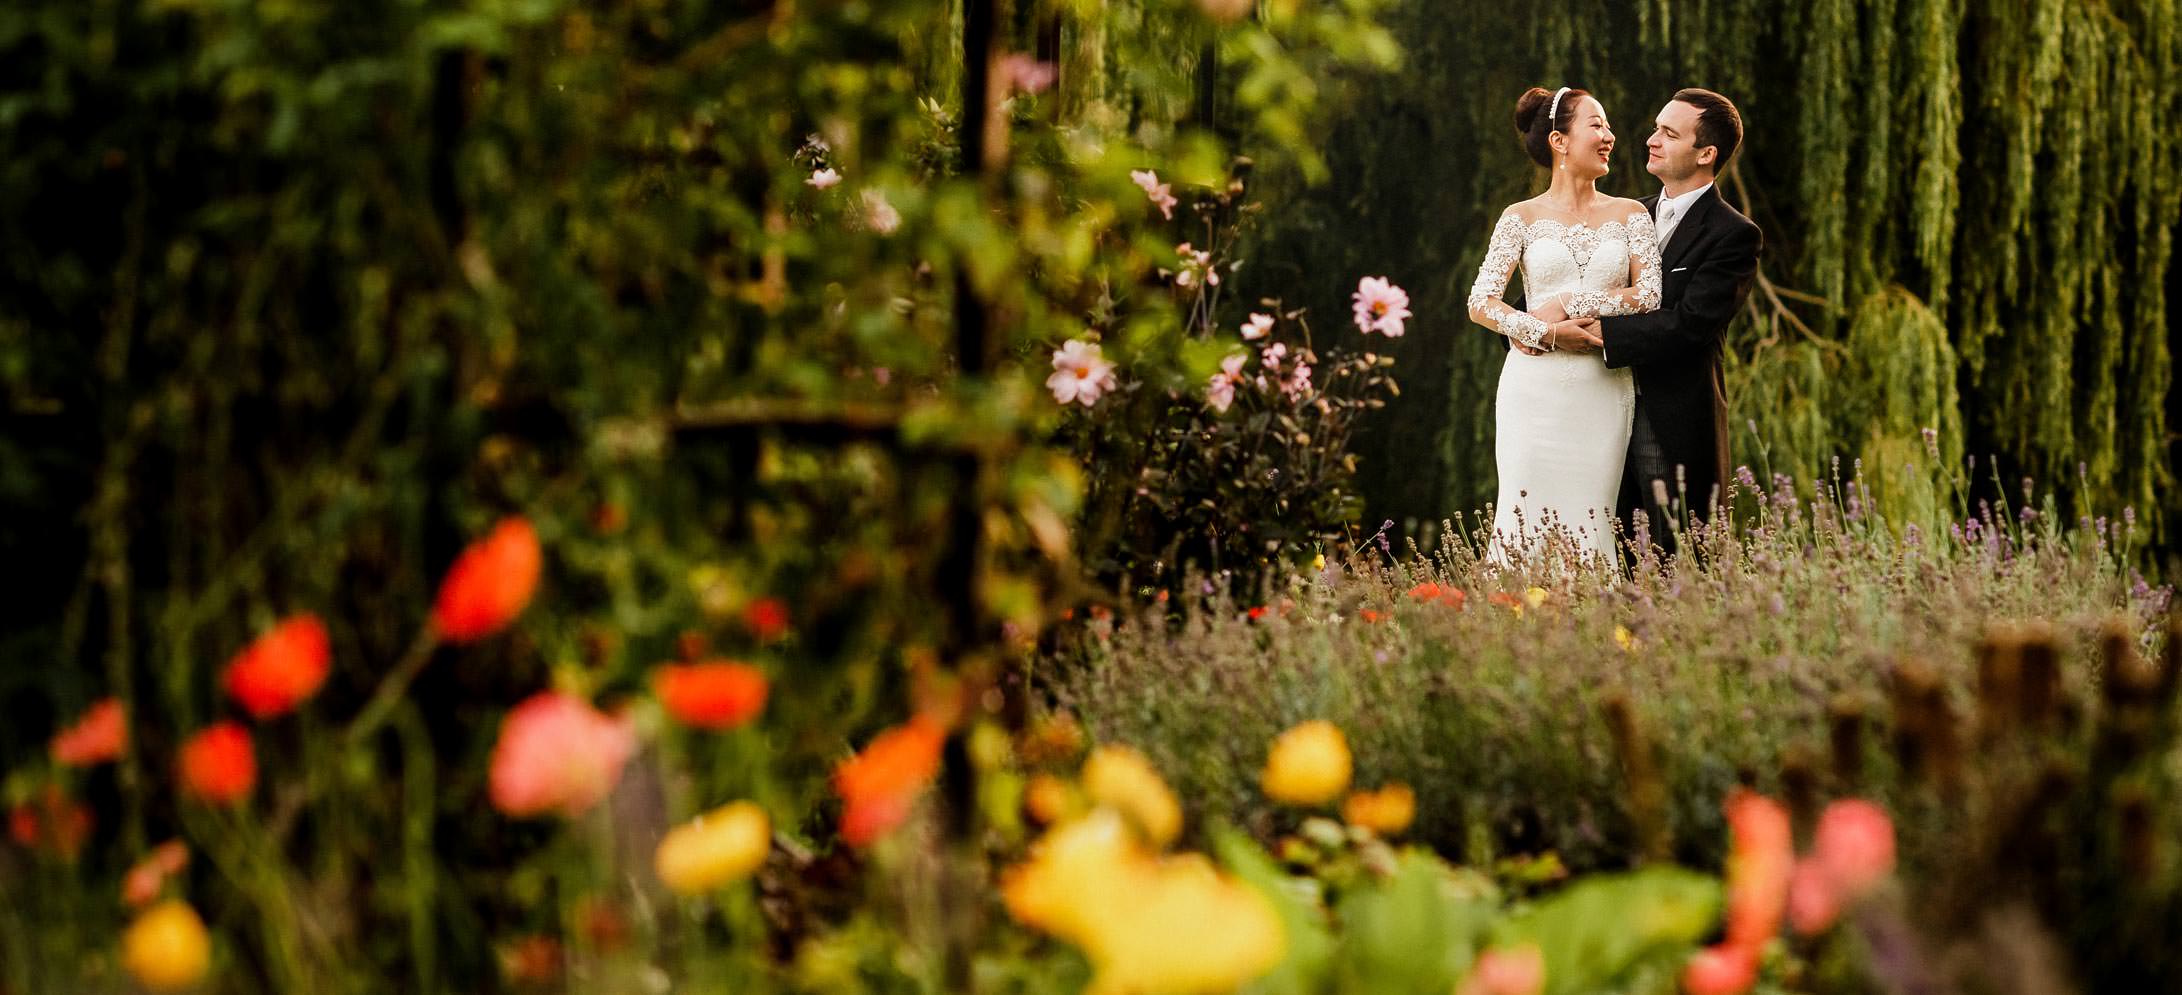 Bride and groom at Coombe Abbey in Warwickshire